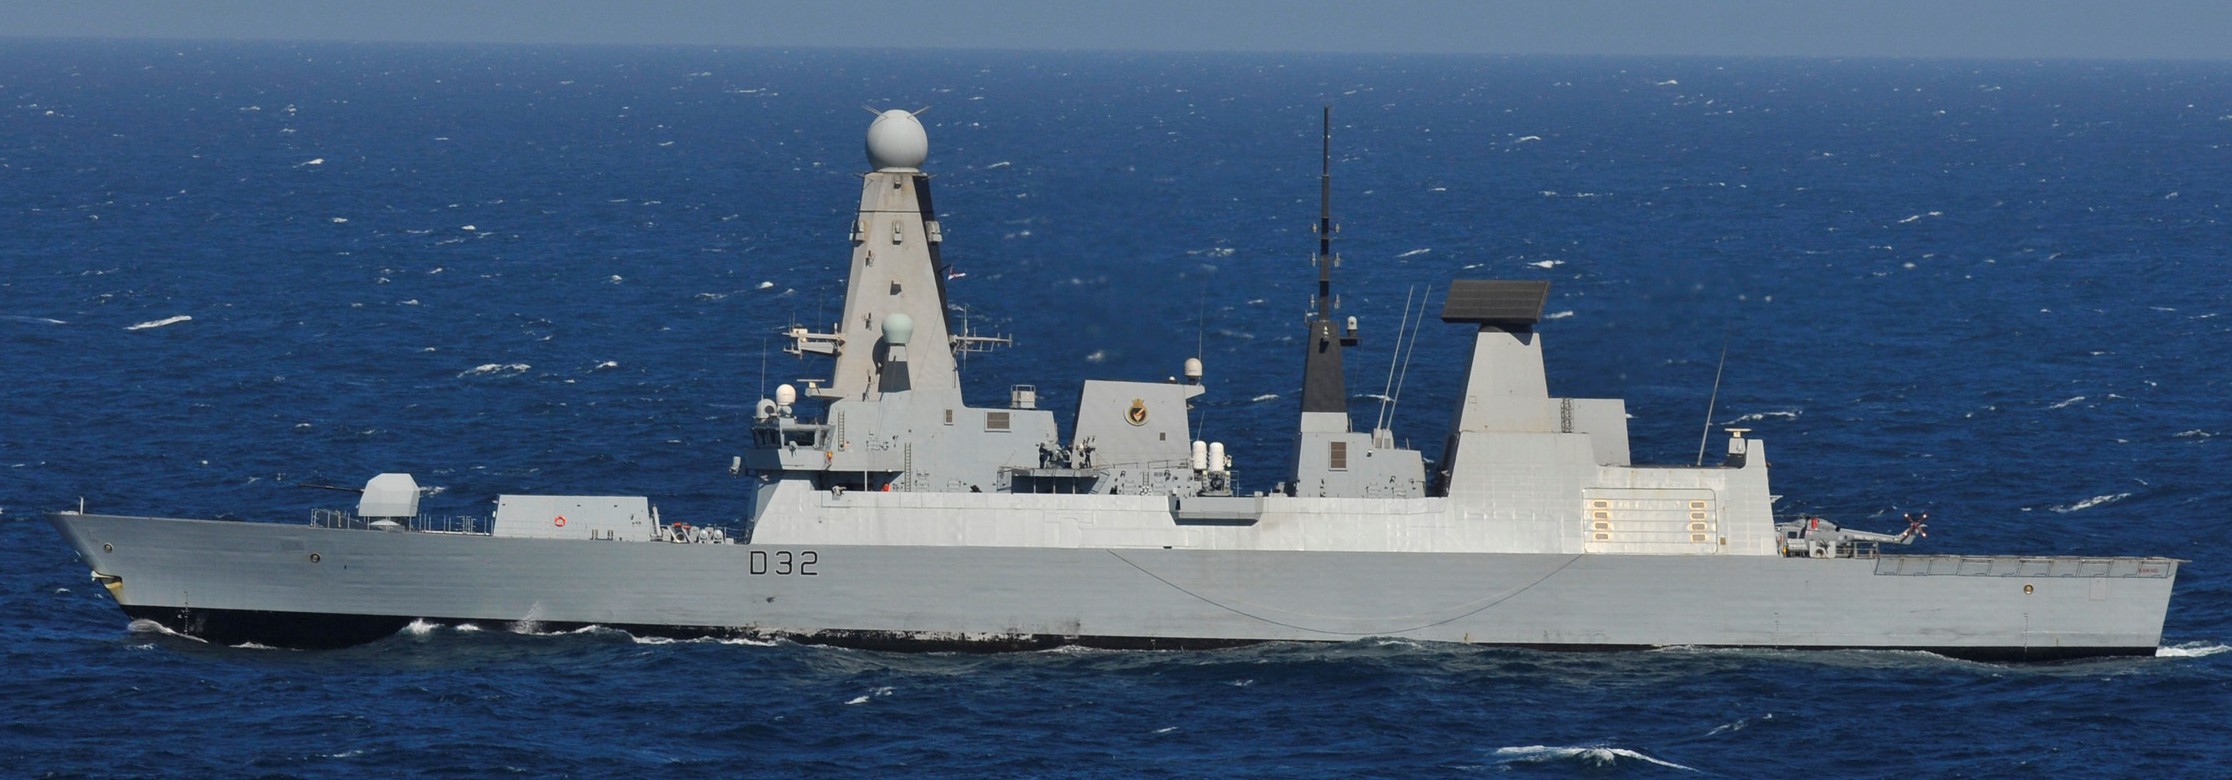 hms daring d-32 type 45 class guided missile destroyer royal navy sea viper paams 11